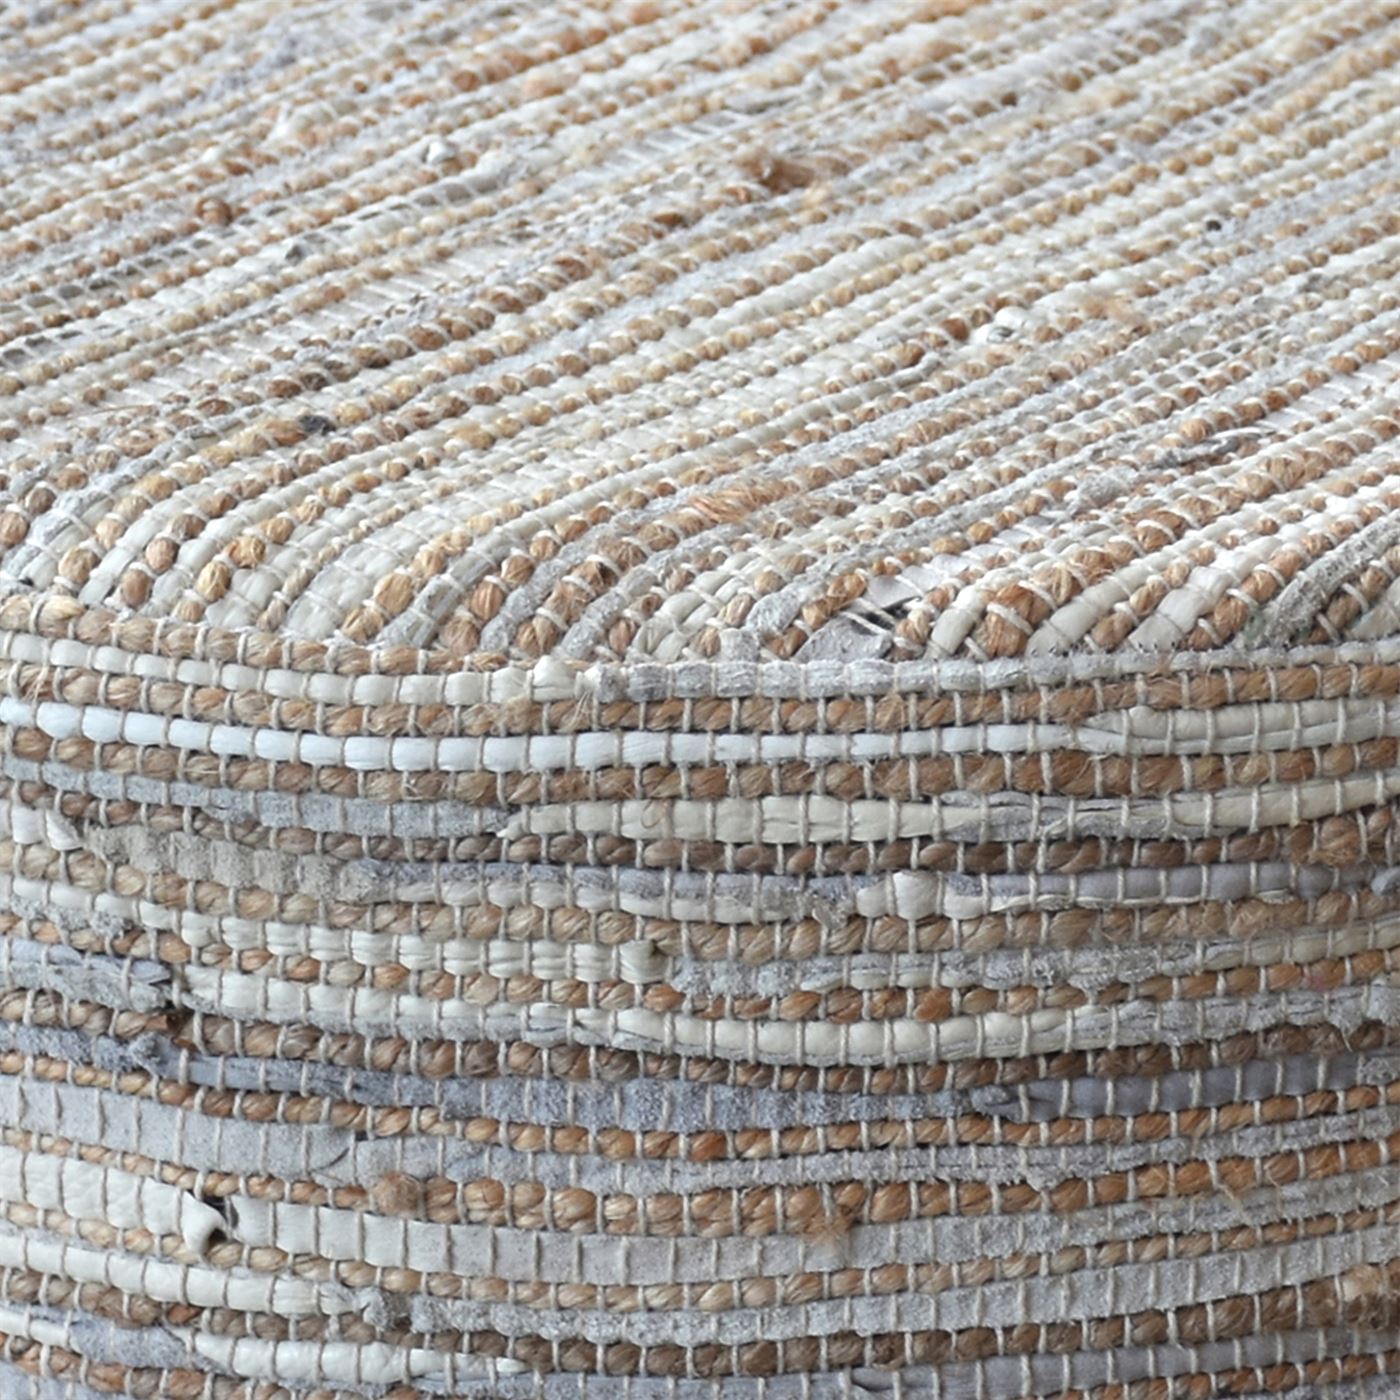 Spica Round Stool, Hemp/ Leather, Natural/ Natural White, Pitloom, Flat Weave 